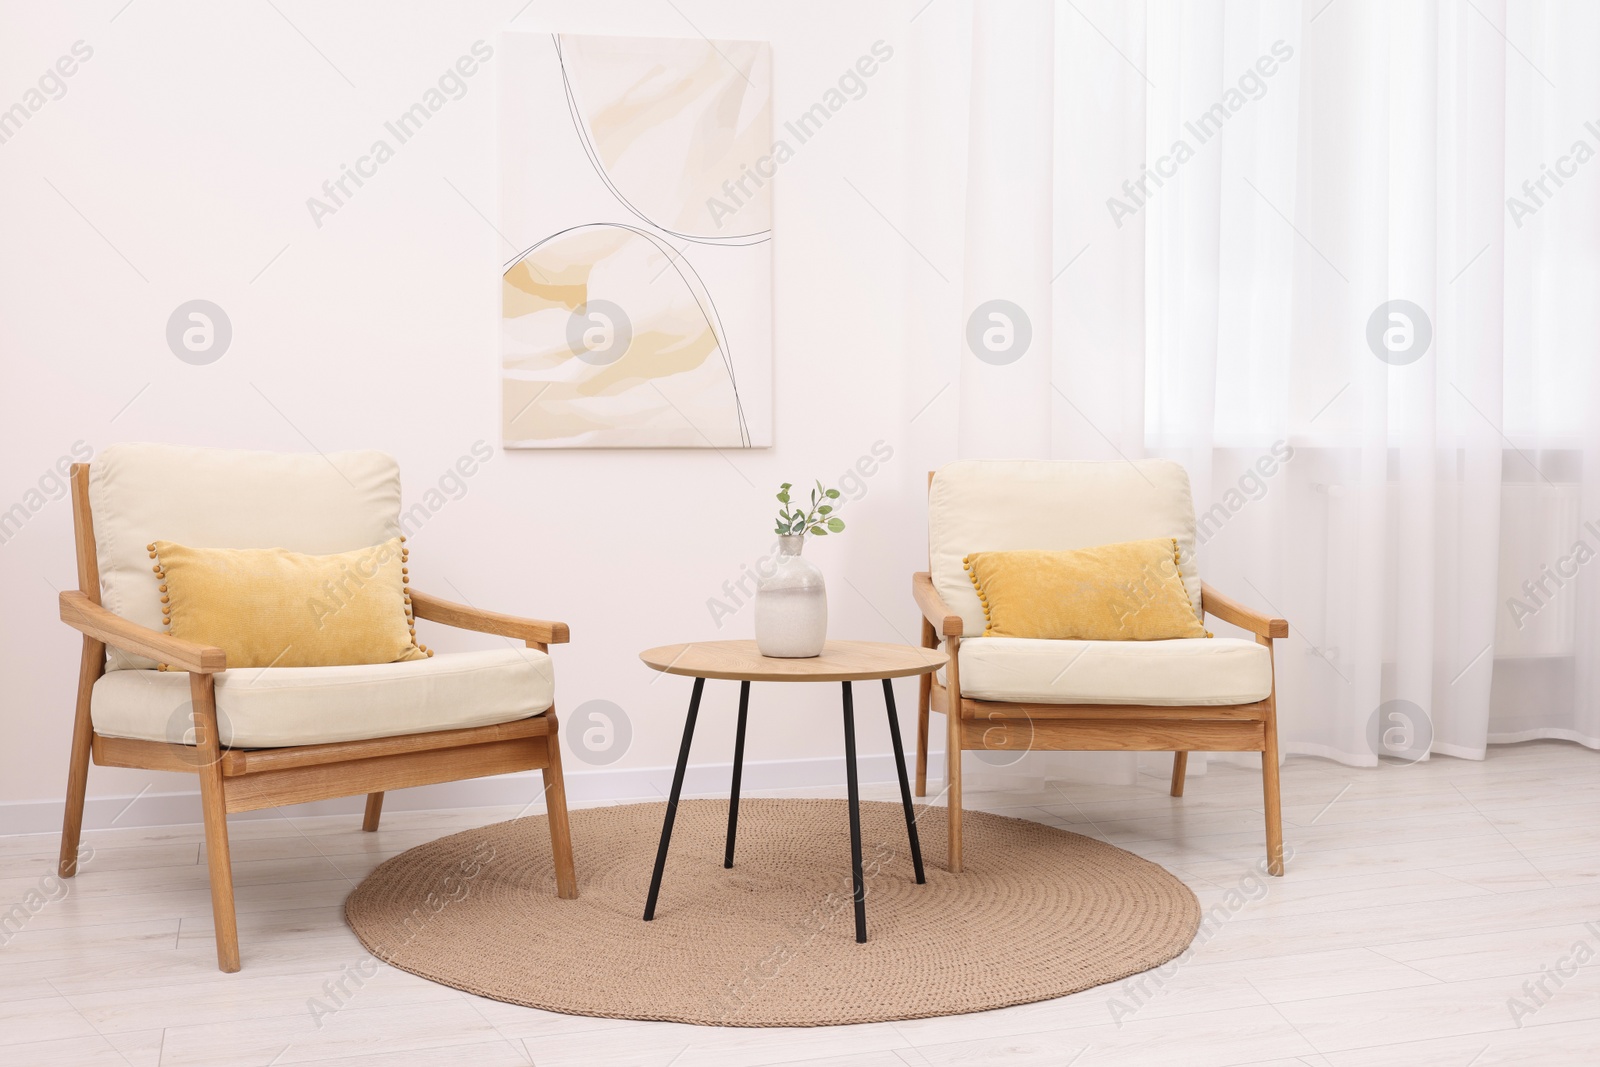 Photo of Stylish armchairs and wooden table in living room. Interior design